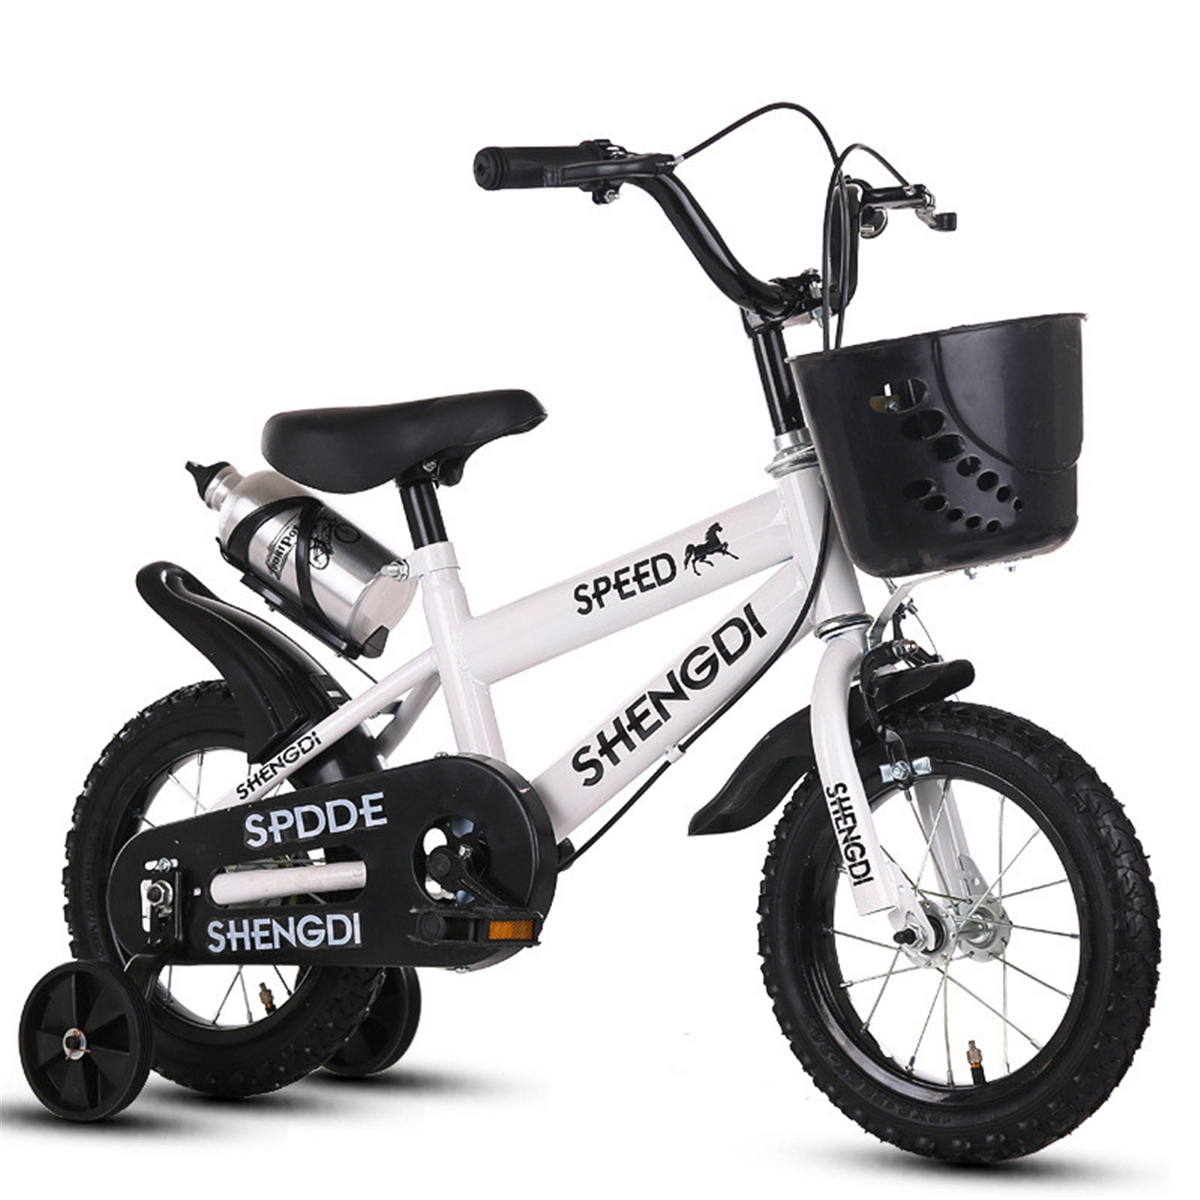 BIKIGHT-12quot-Kids-Bike-Tricycle-3-Wheels-Balance-Protection-Safety-Baby-Safety-Cycling-Training-Bi-1339156